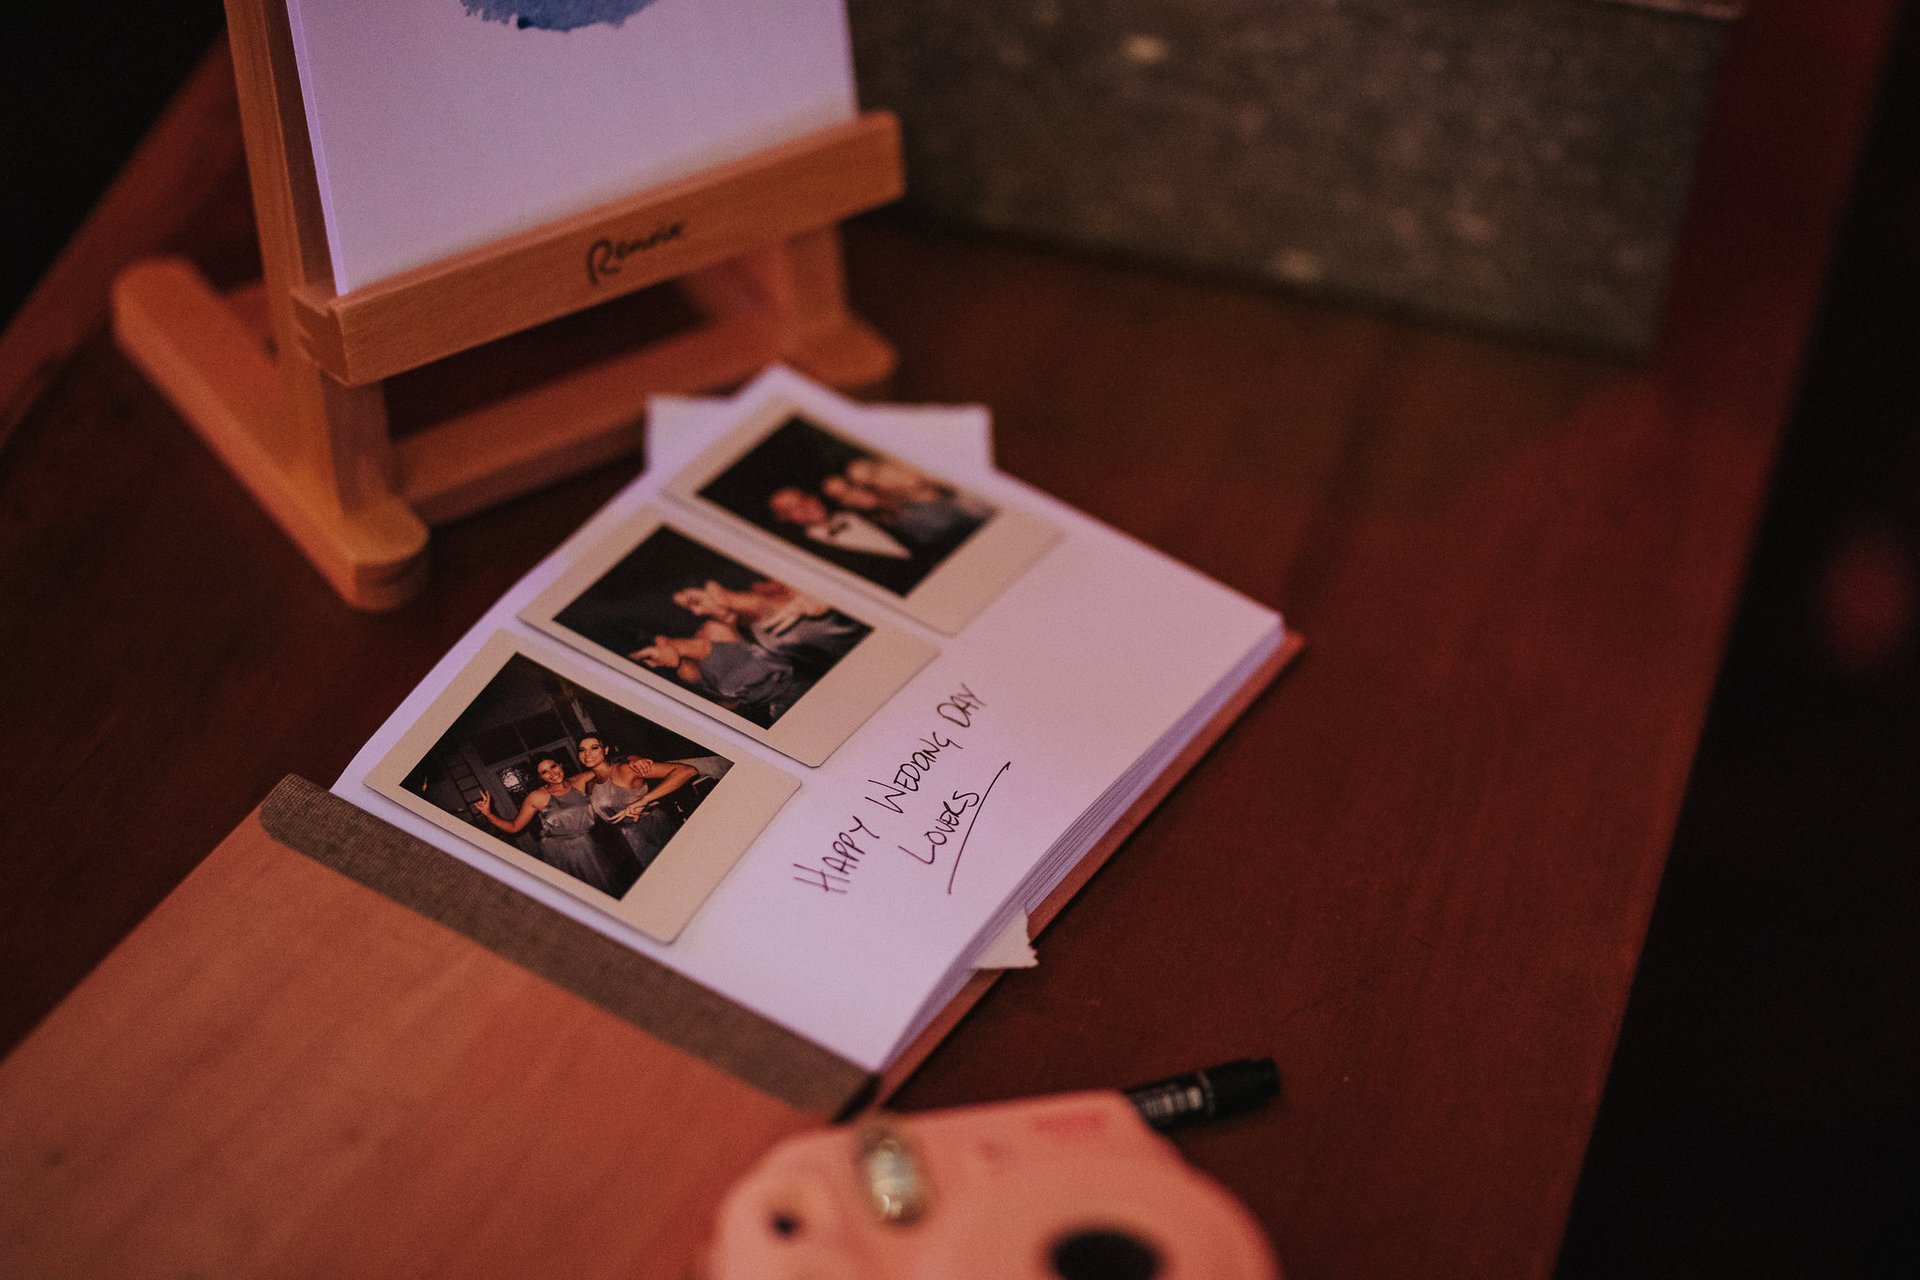 The guest book